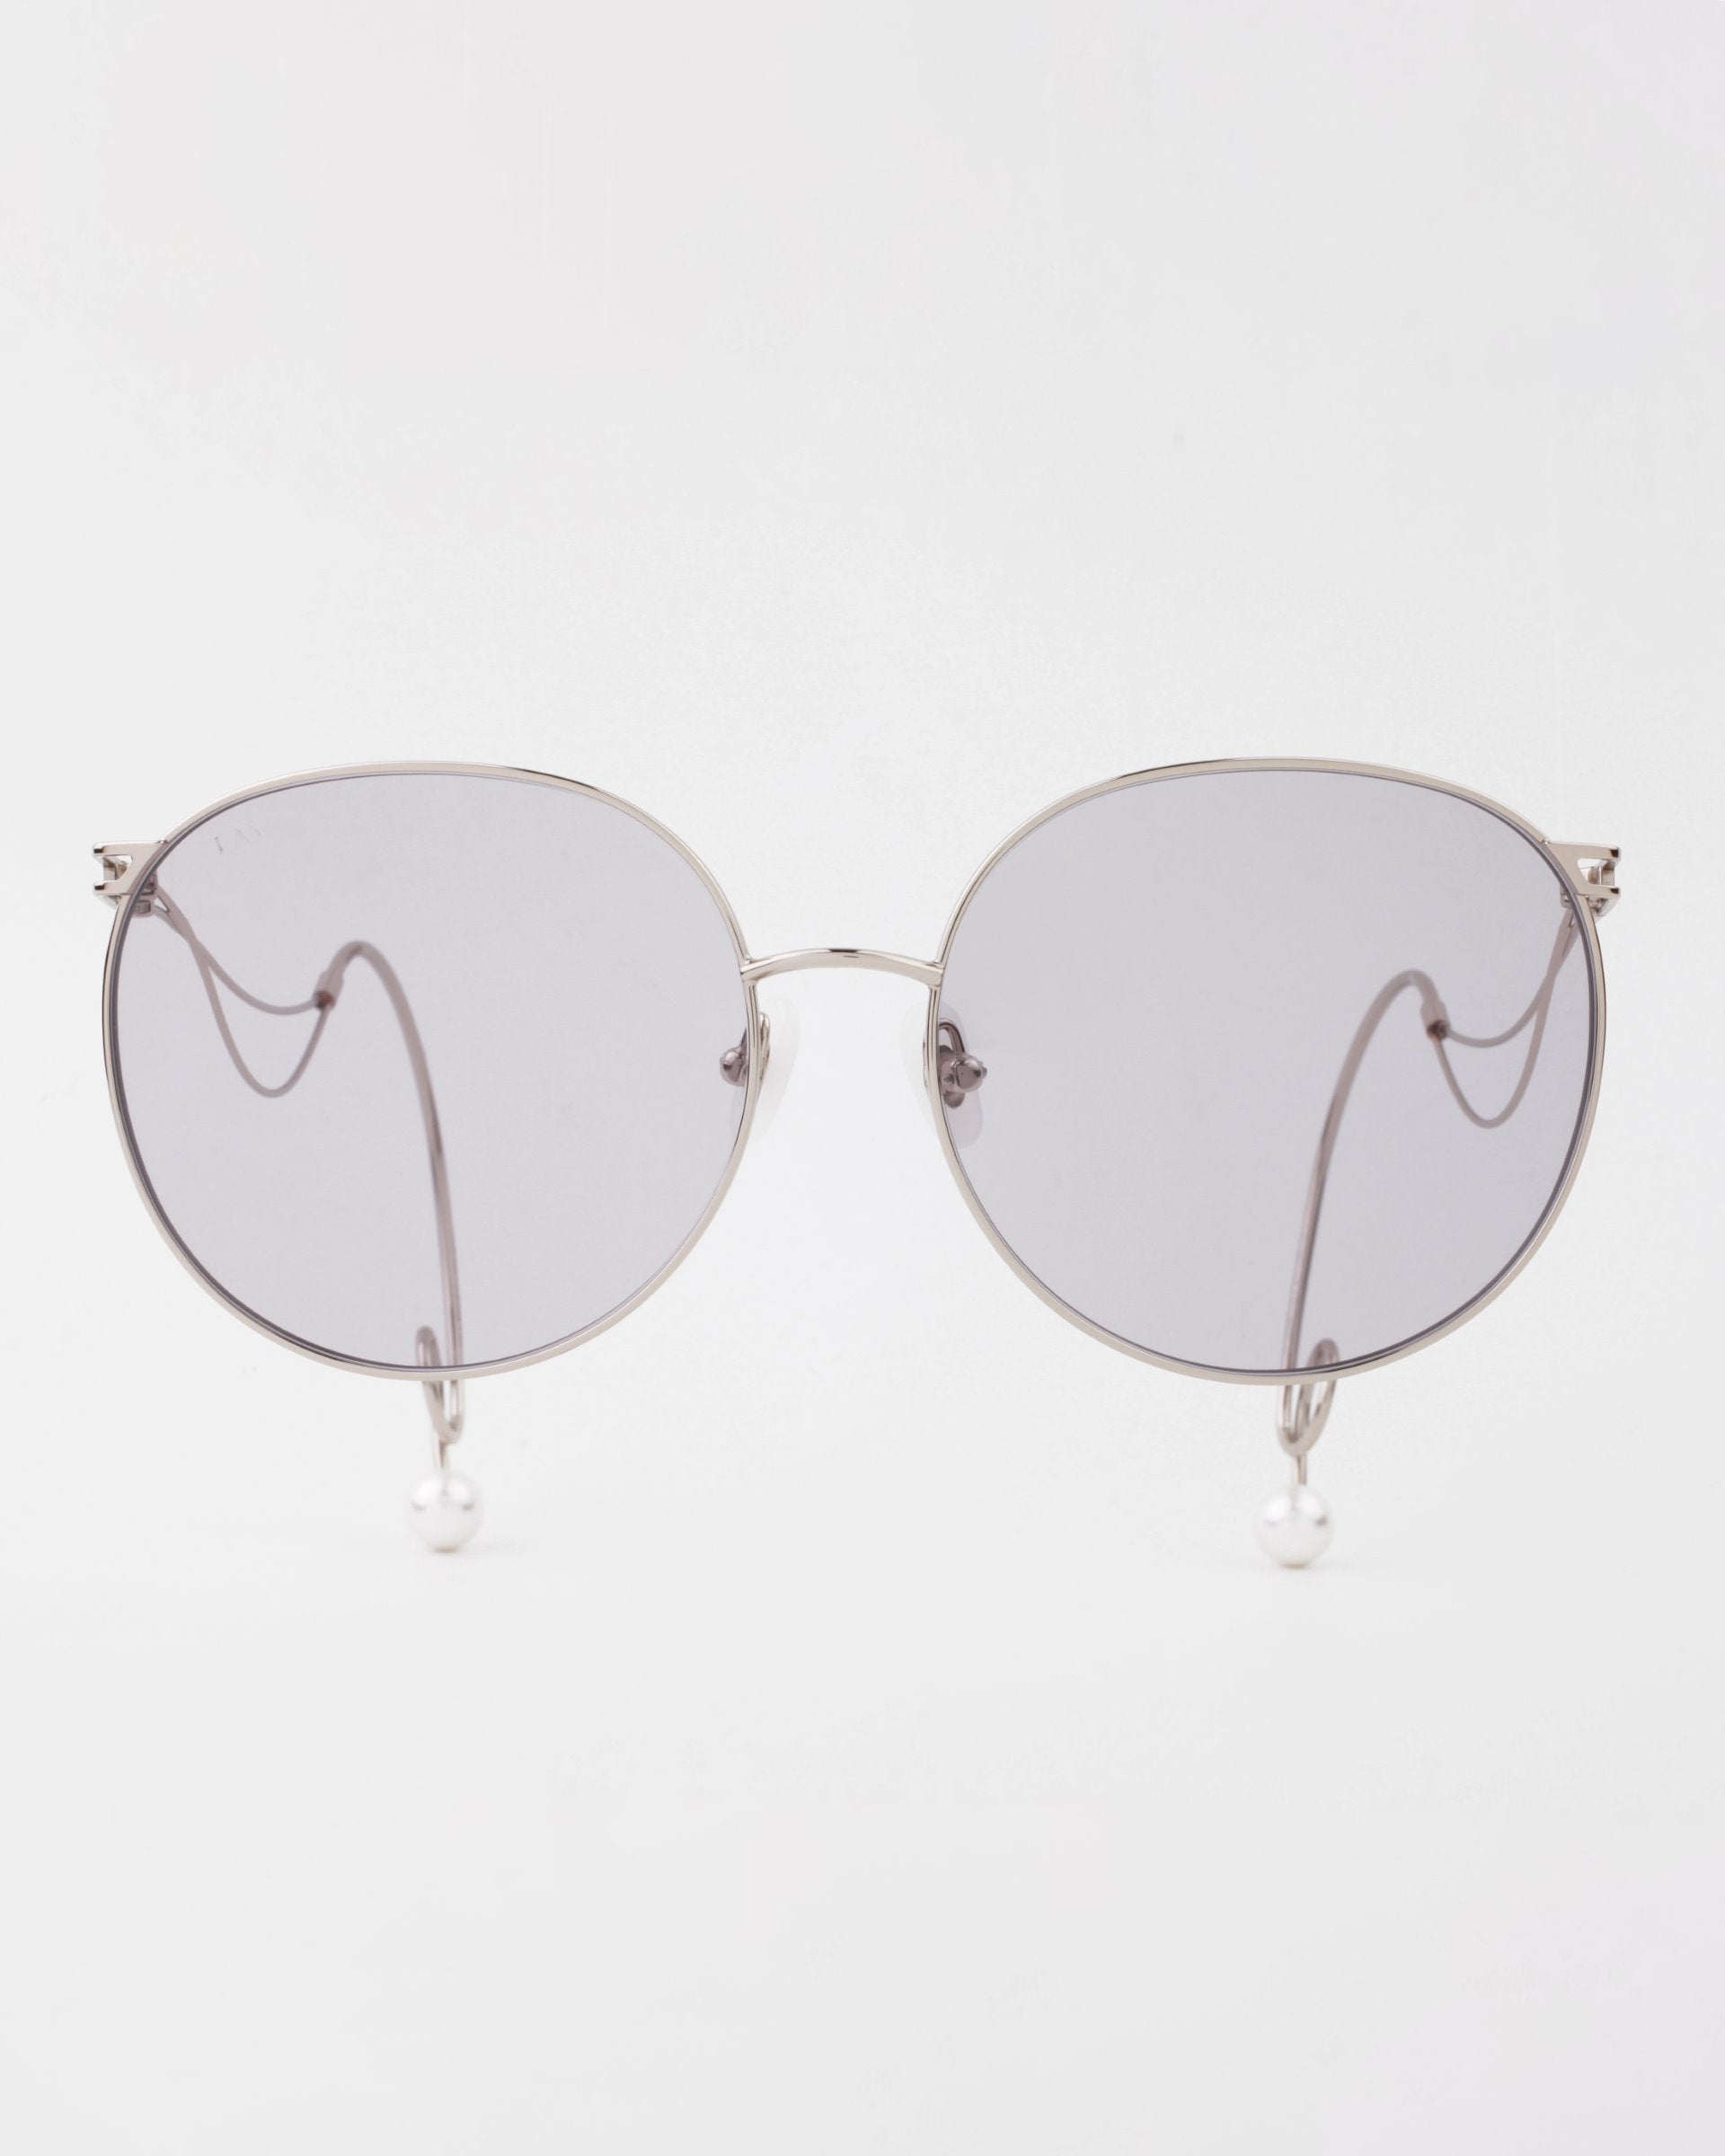 A pair of For Art's Sake® Birthday Cake silver-framed sunglasses with round, dark-tinted lenses. The temples feature a unique design with looped wire and small, pearl-like accents at the tips. Lightweight shatter-resistant lenses ensure durability and comfort. The background is plain white.